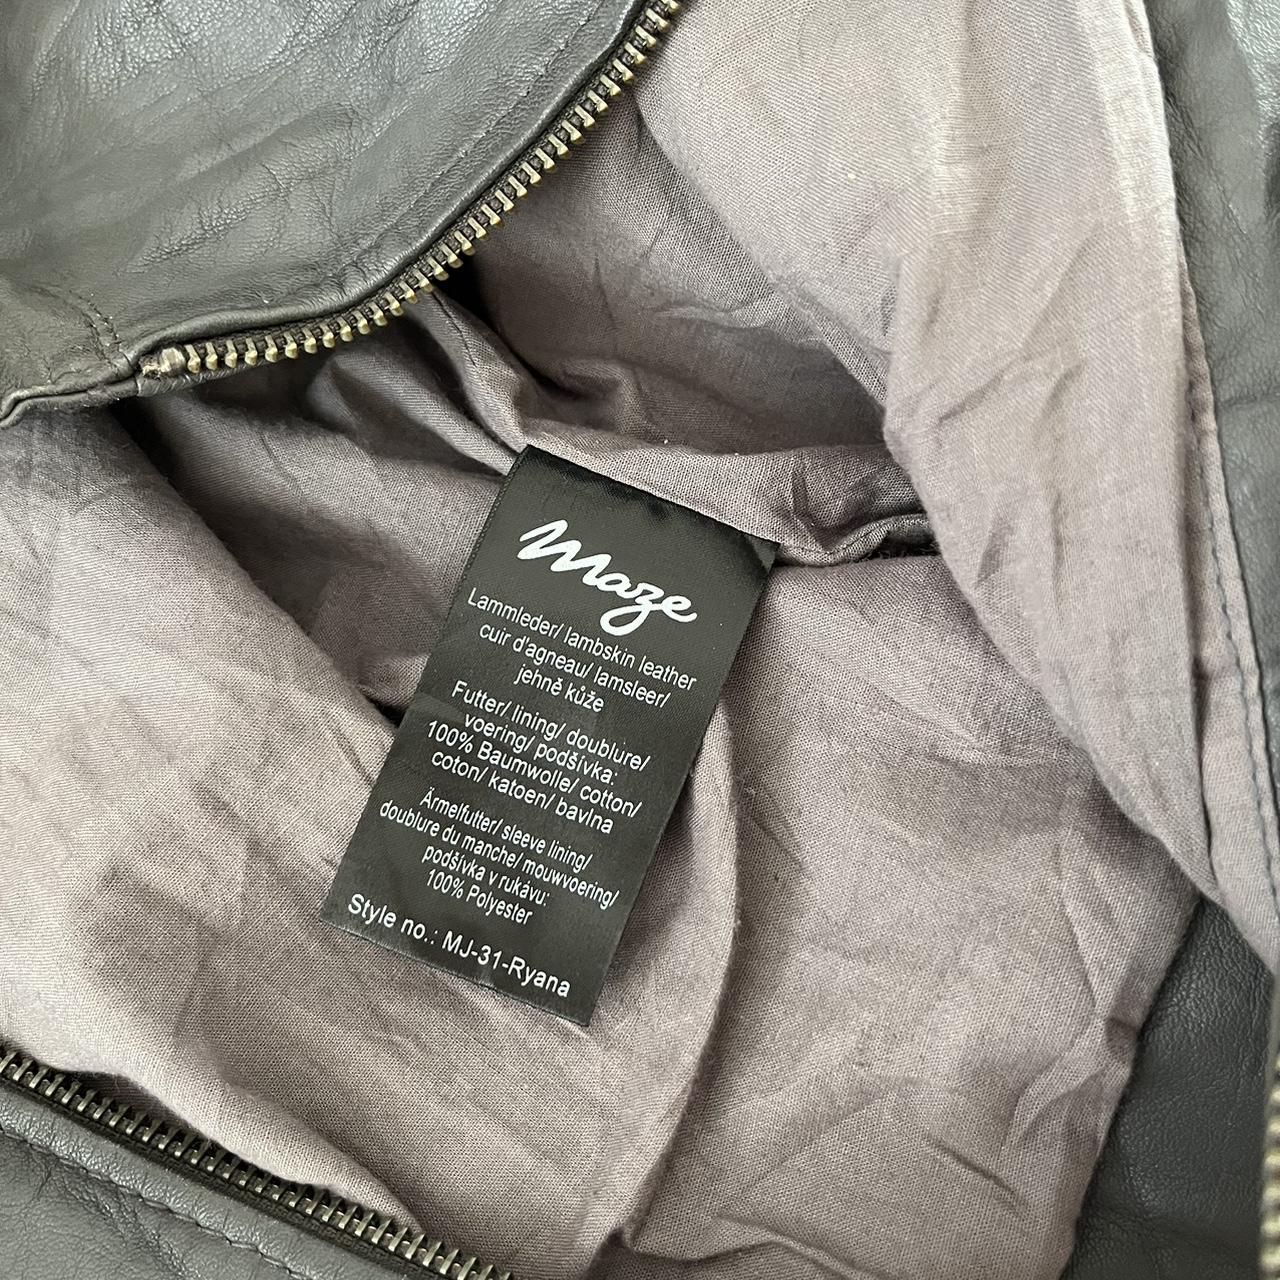 Depop Vintage high jacket quality leather Made from real... -